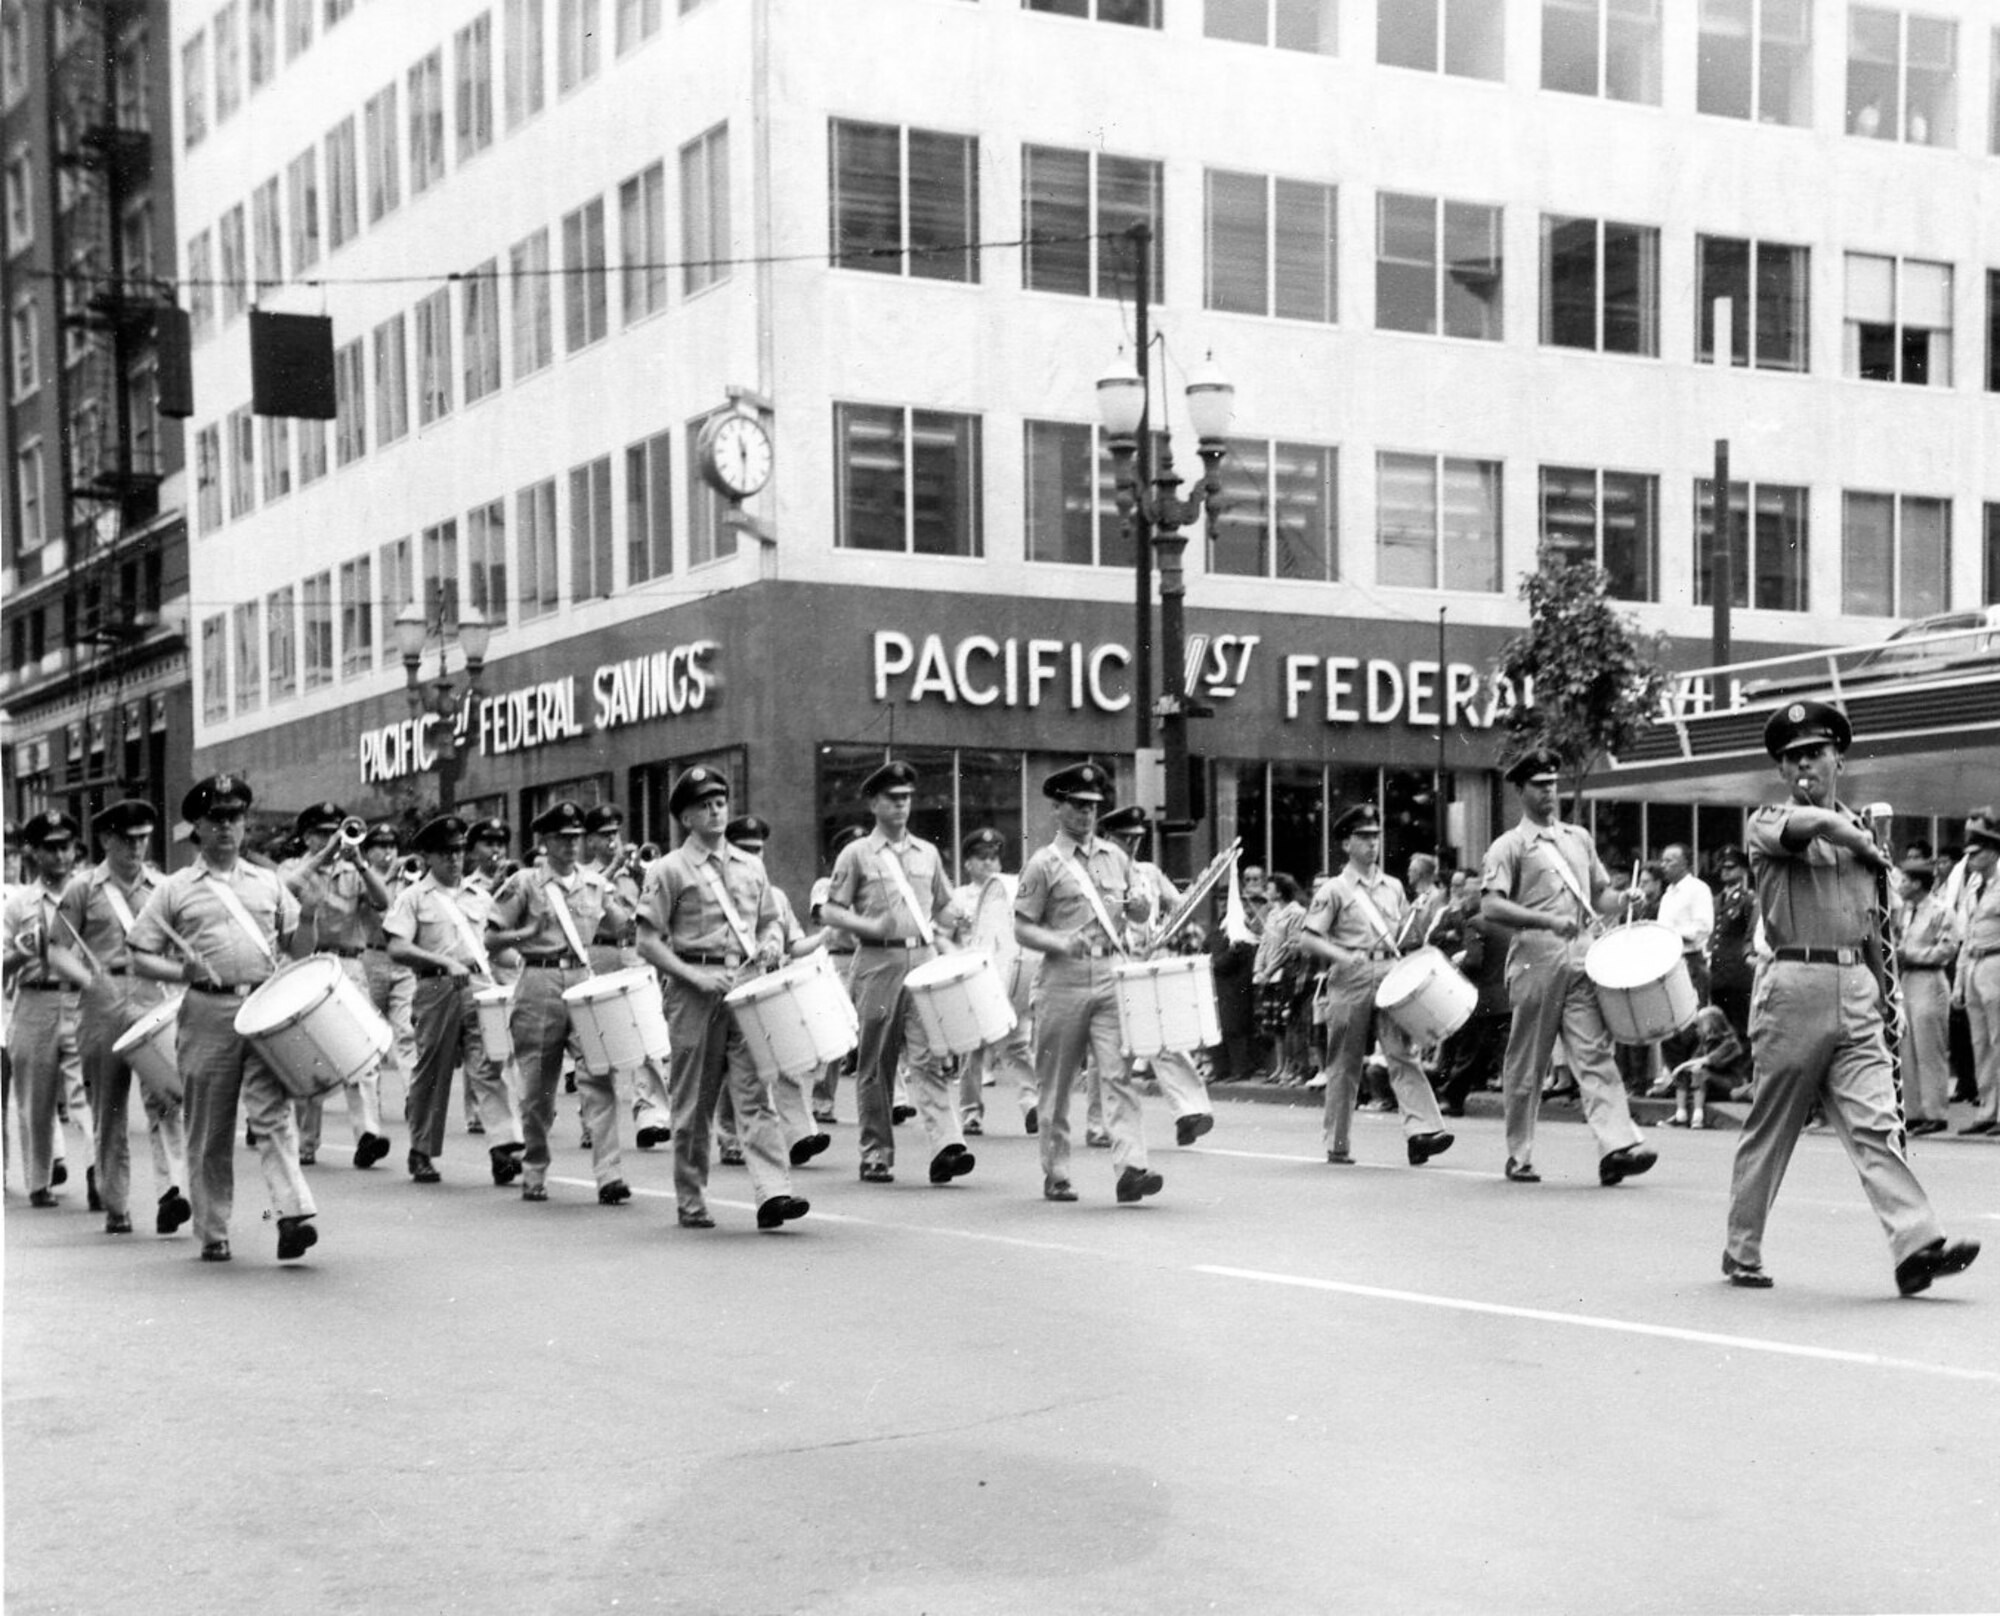 The OreANG’s Twirler, probably champion Ms. Carol Johnson, leads the OreANG Drum & Bugle Corps in the summer khaki uniforms of that era down a Portland street in the 53rd Annual Rose Festival’s Grand Floral Parade, Saturday, June 10, 1961. Drum Major MSgt Unverricht leads the corps immediately behind her.